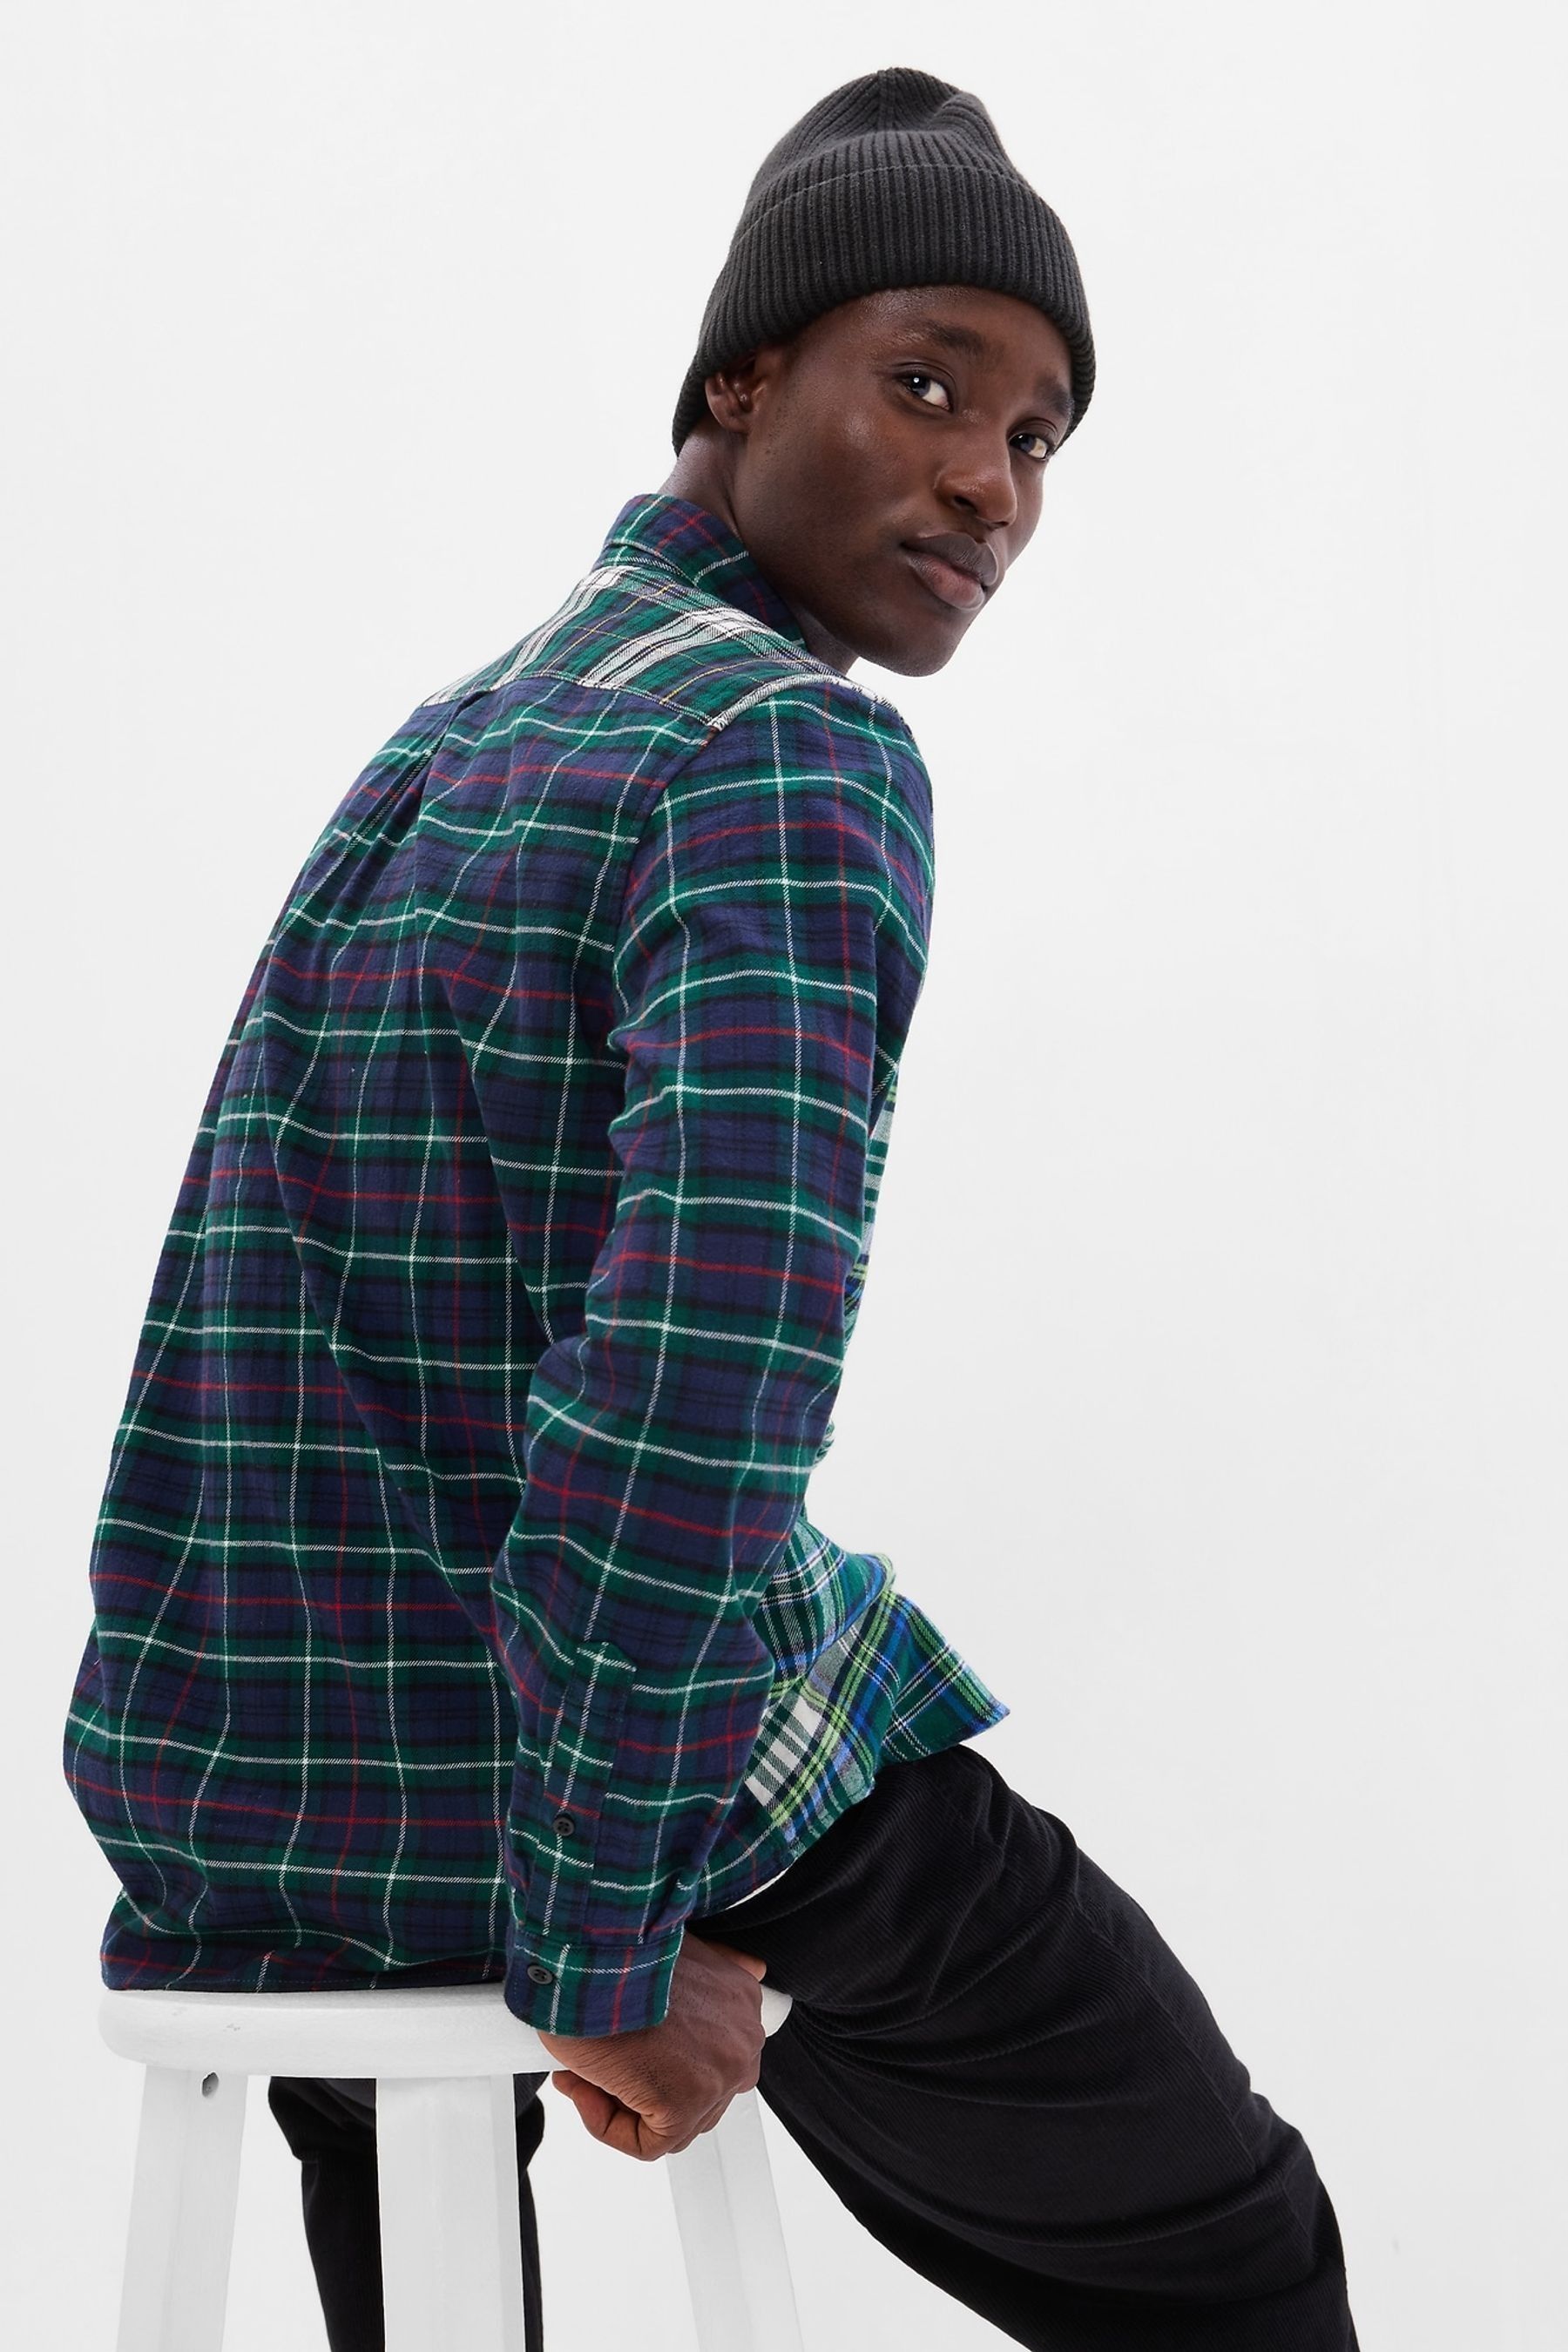 Buy Gap Organic Cotton Mixed Plaid Flannel Shirt from the Gap online shop